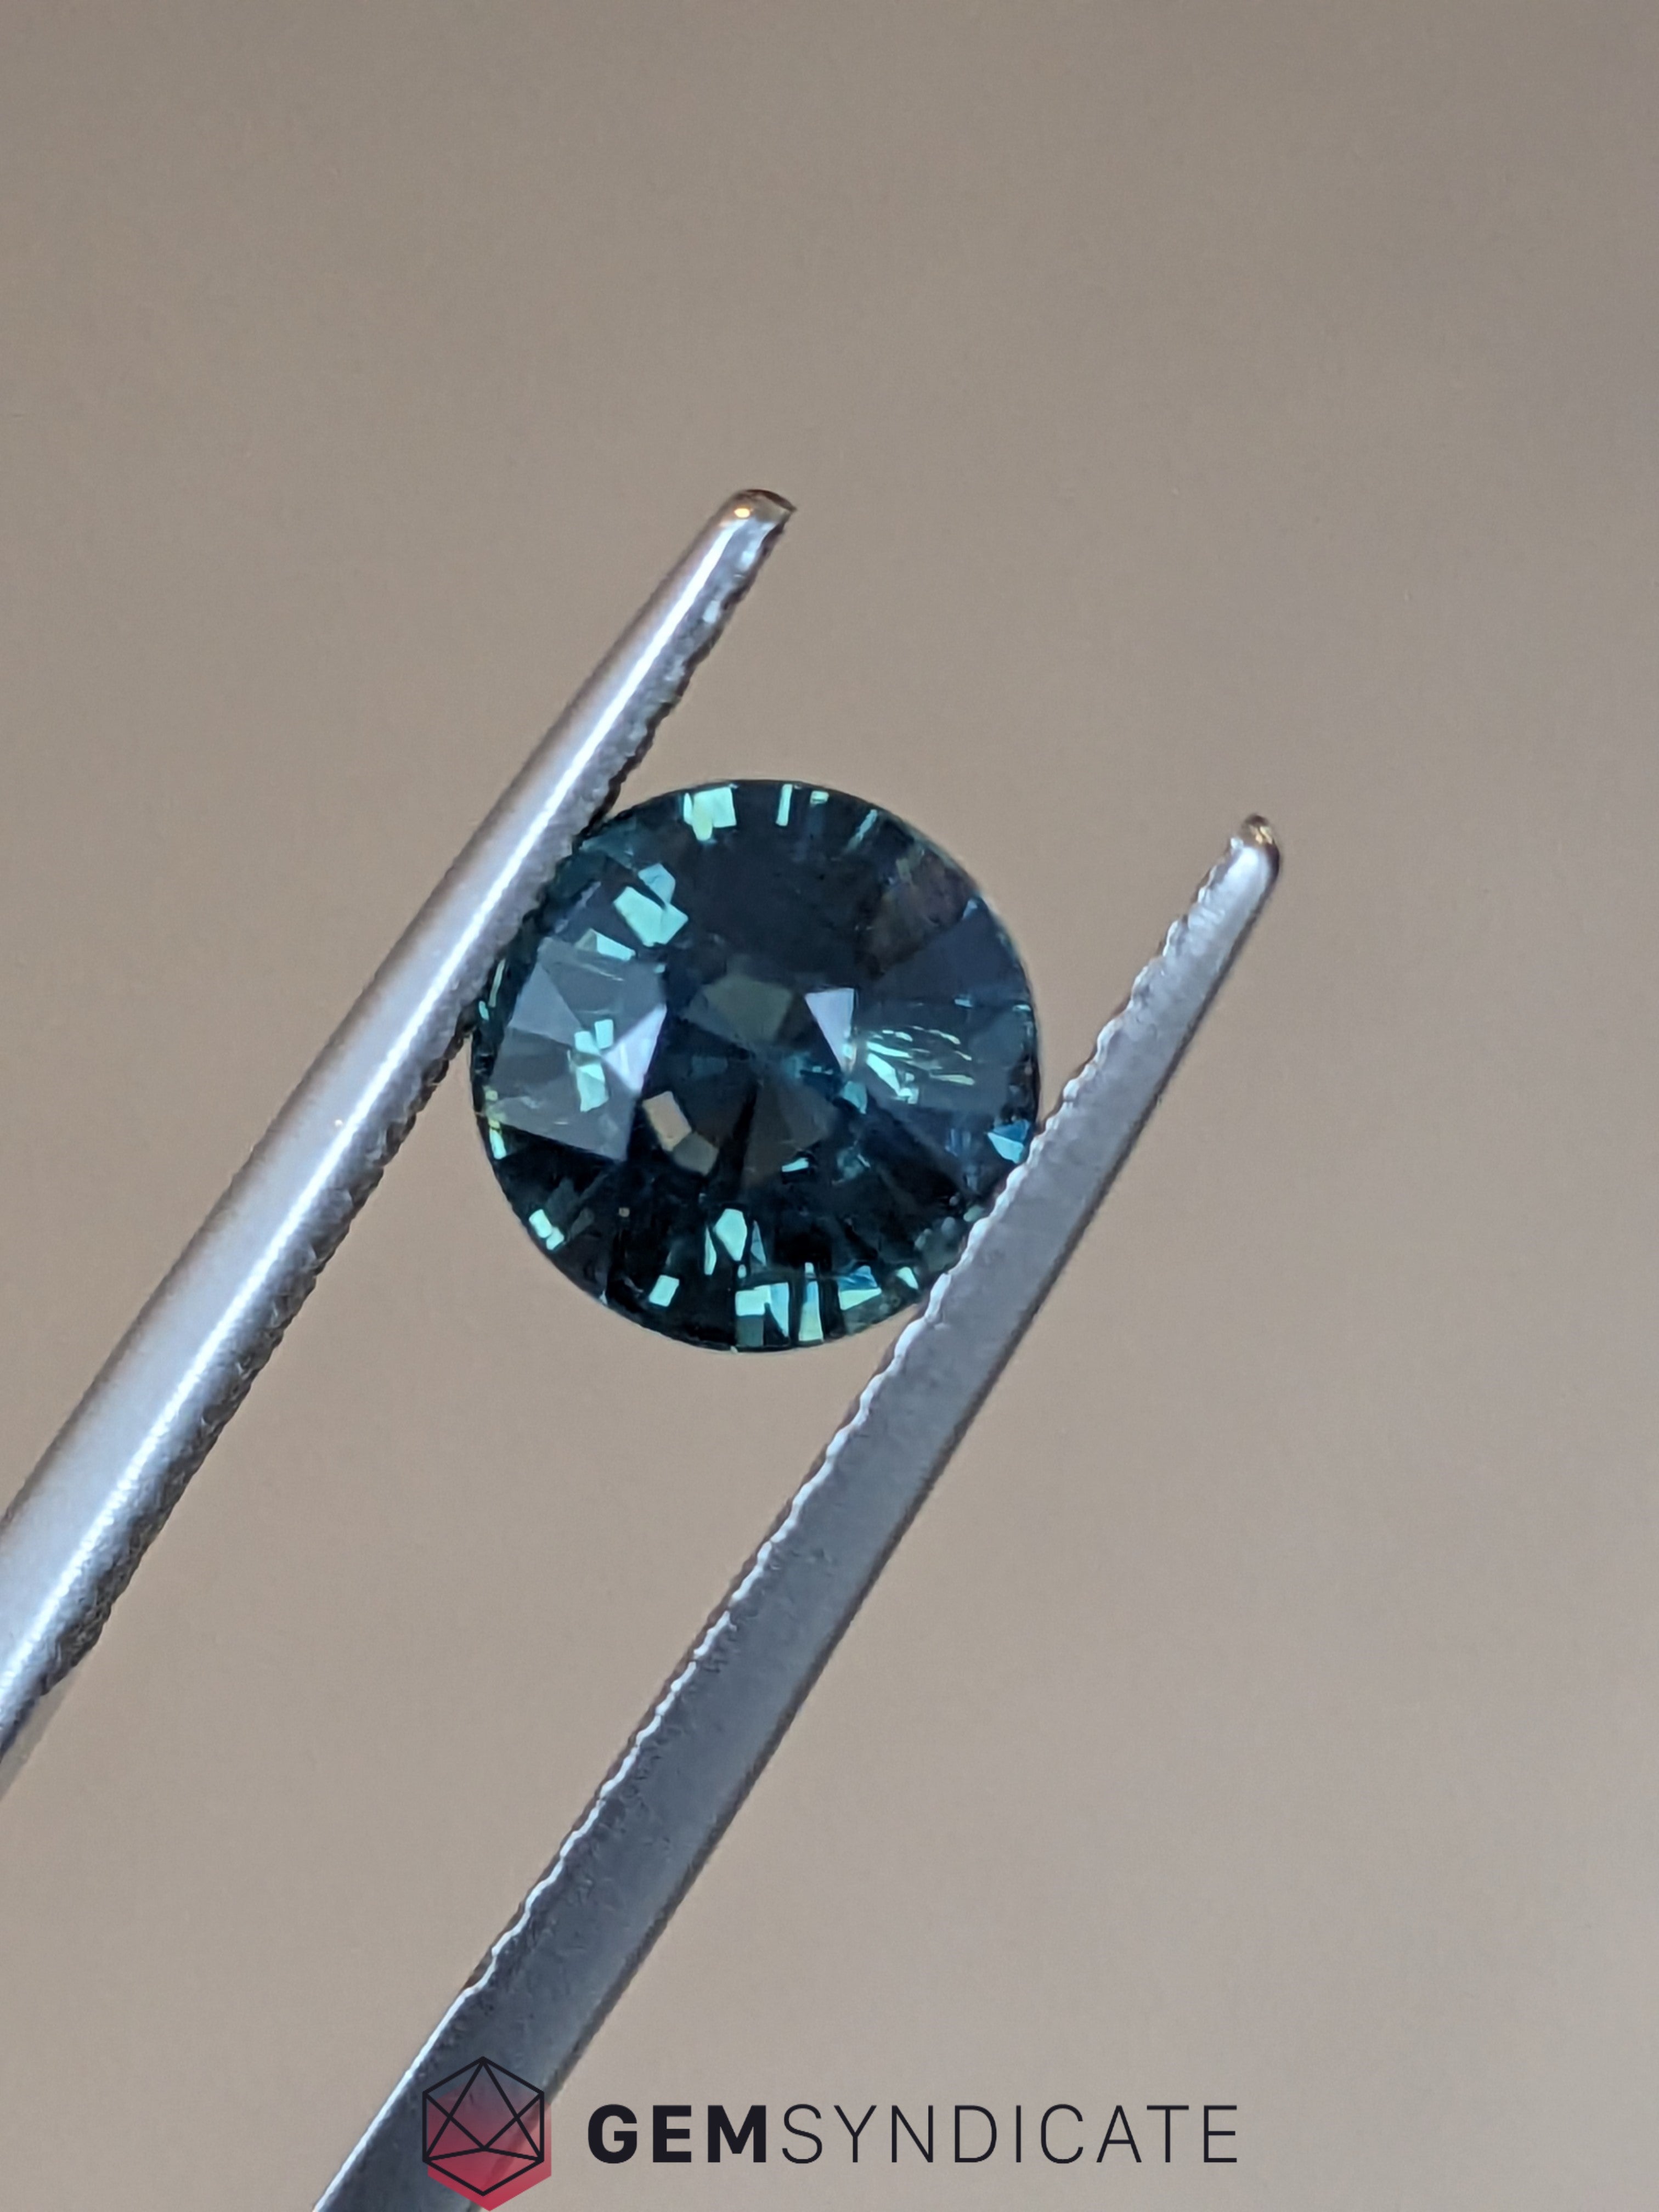 Ethereal Round Teal Sapphire 2.08ct